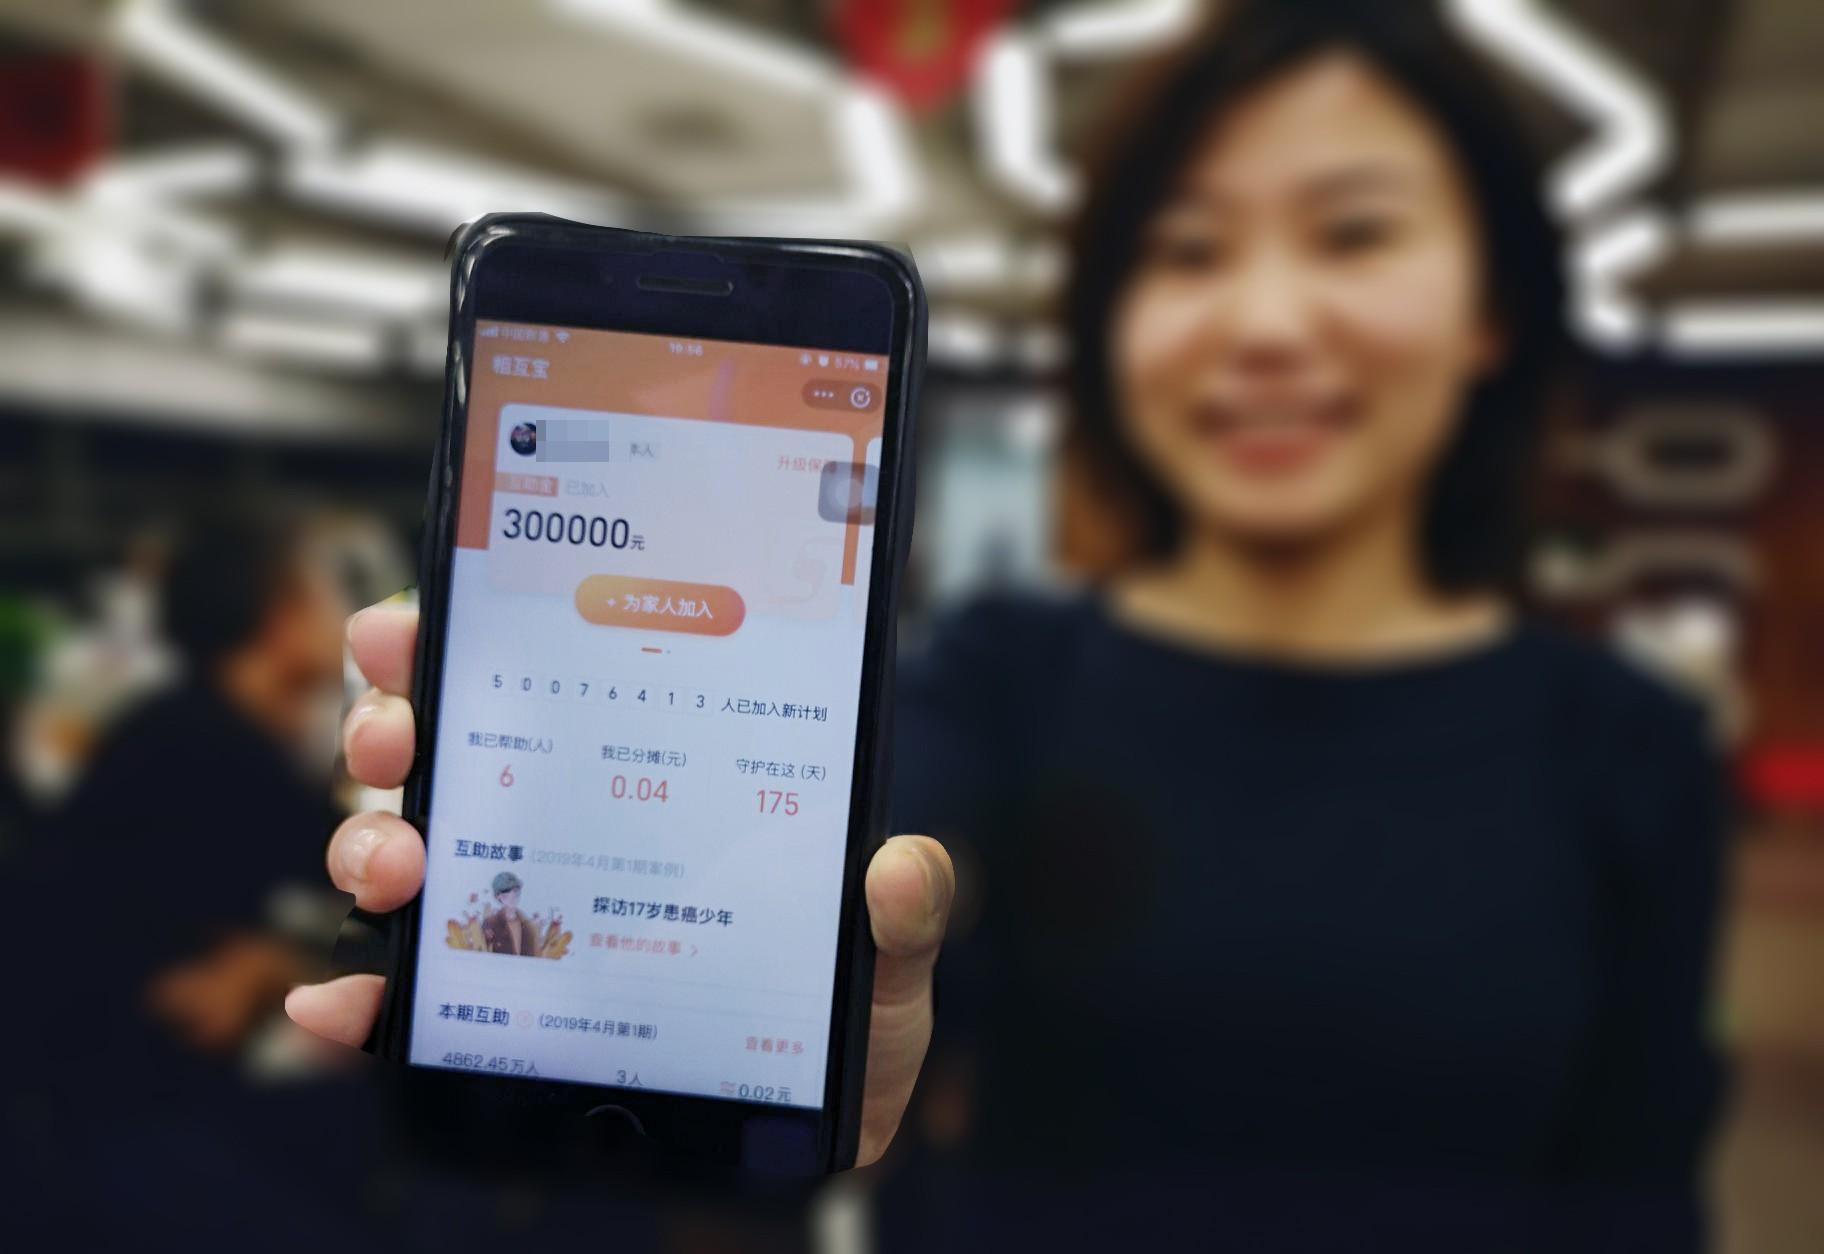 Xiang Hu Bao was launched in October 2018 on Ant Financial’s mobile payments platform, Alipay. Photo: Handout